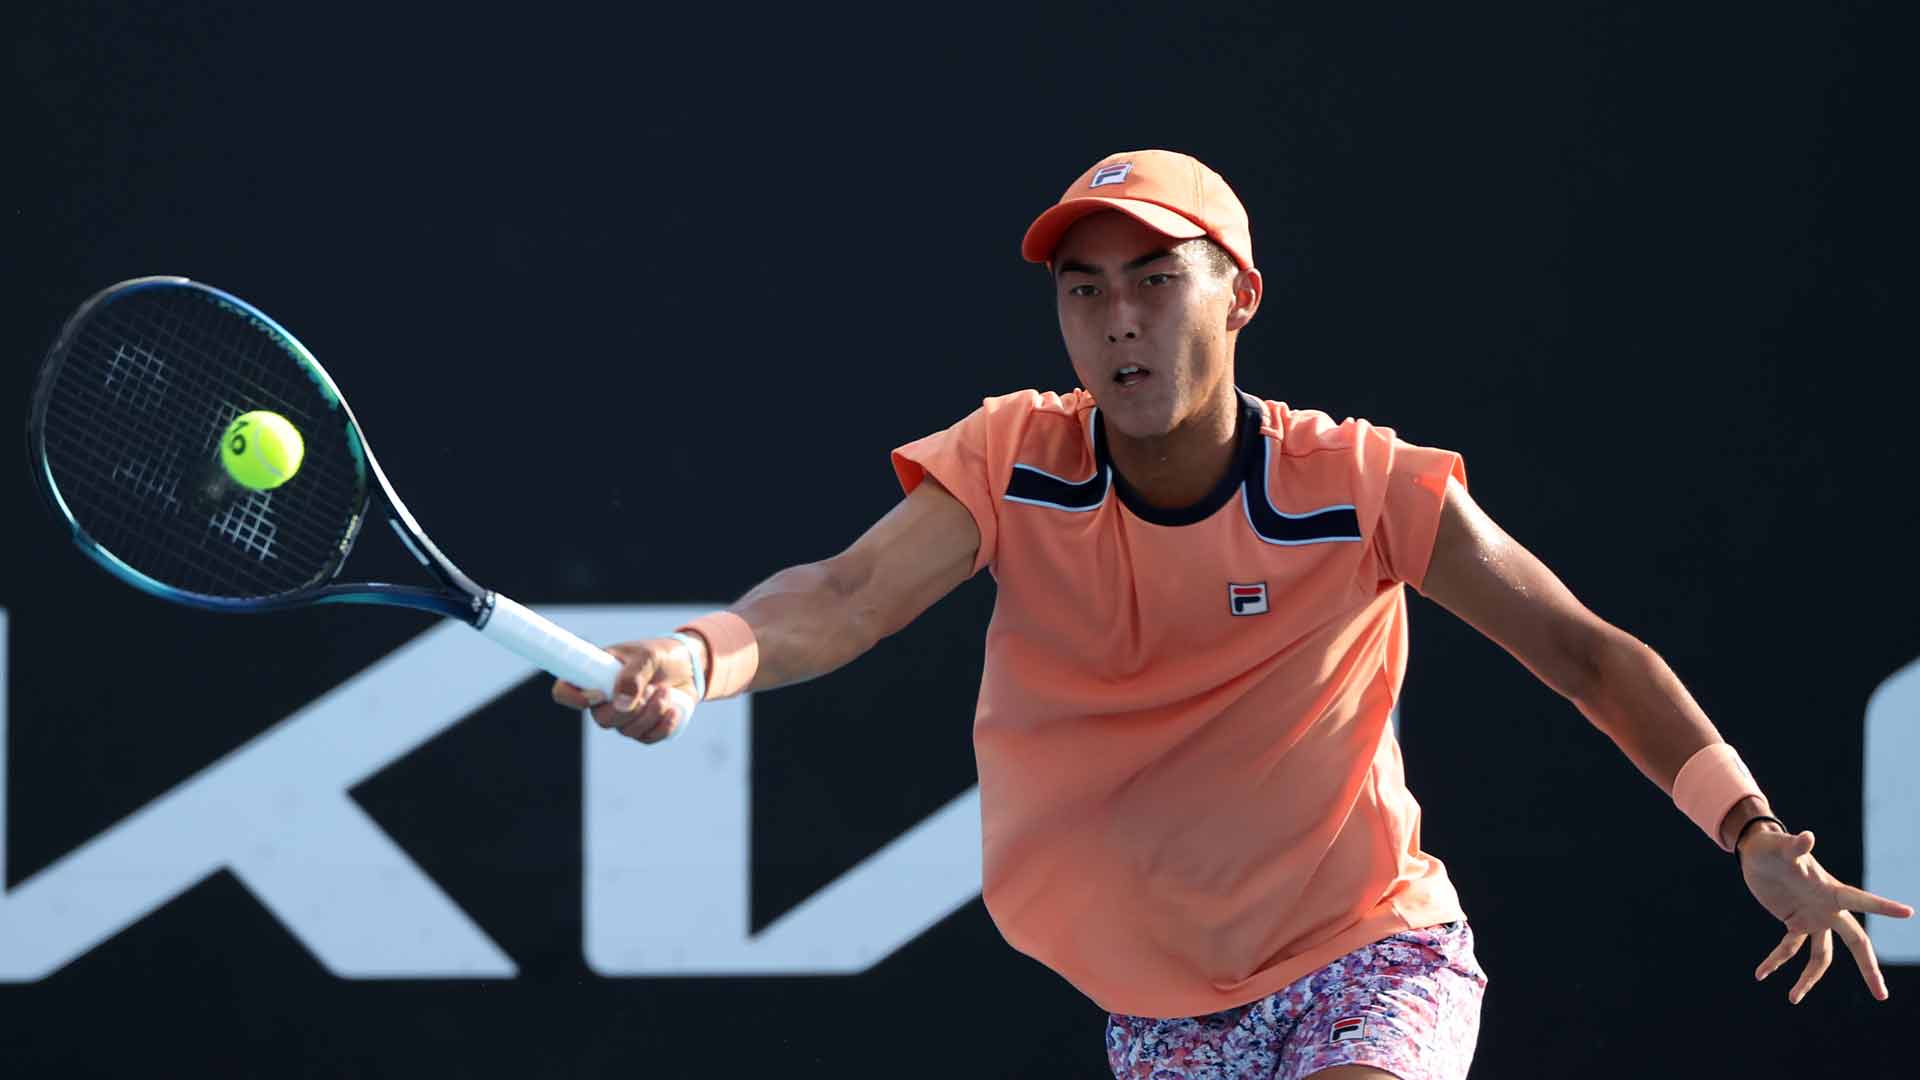 <a href='https://www.atptour.com/en/players/rinky-hijikata/h0bh/overview'>Rinky Hijikata</a> earns a hard-fought five-set victory at the 2023 <a href='https://www.atptour.com/en/tournaments/australian-open/580/overview'>Australian Open</a>.